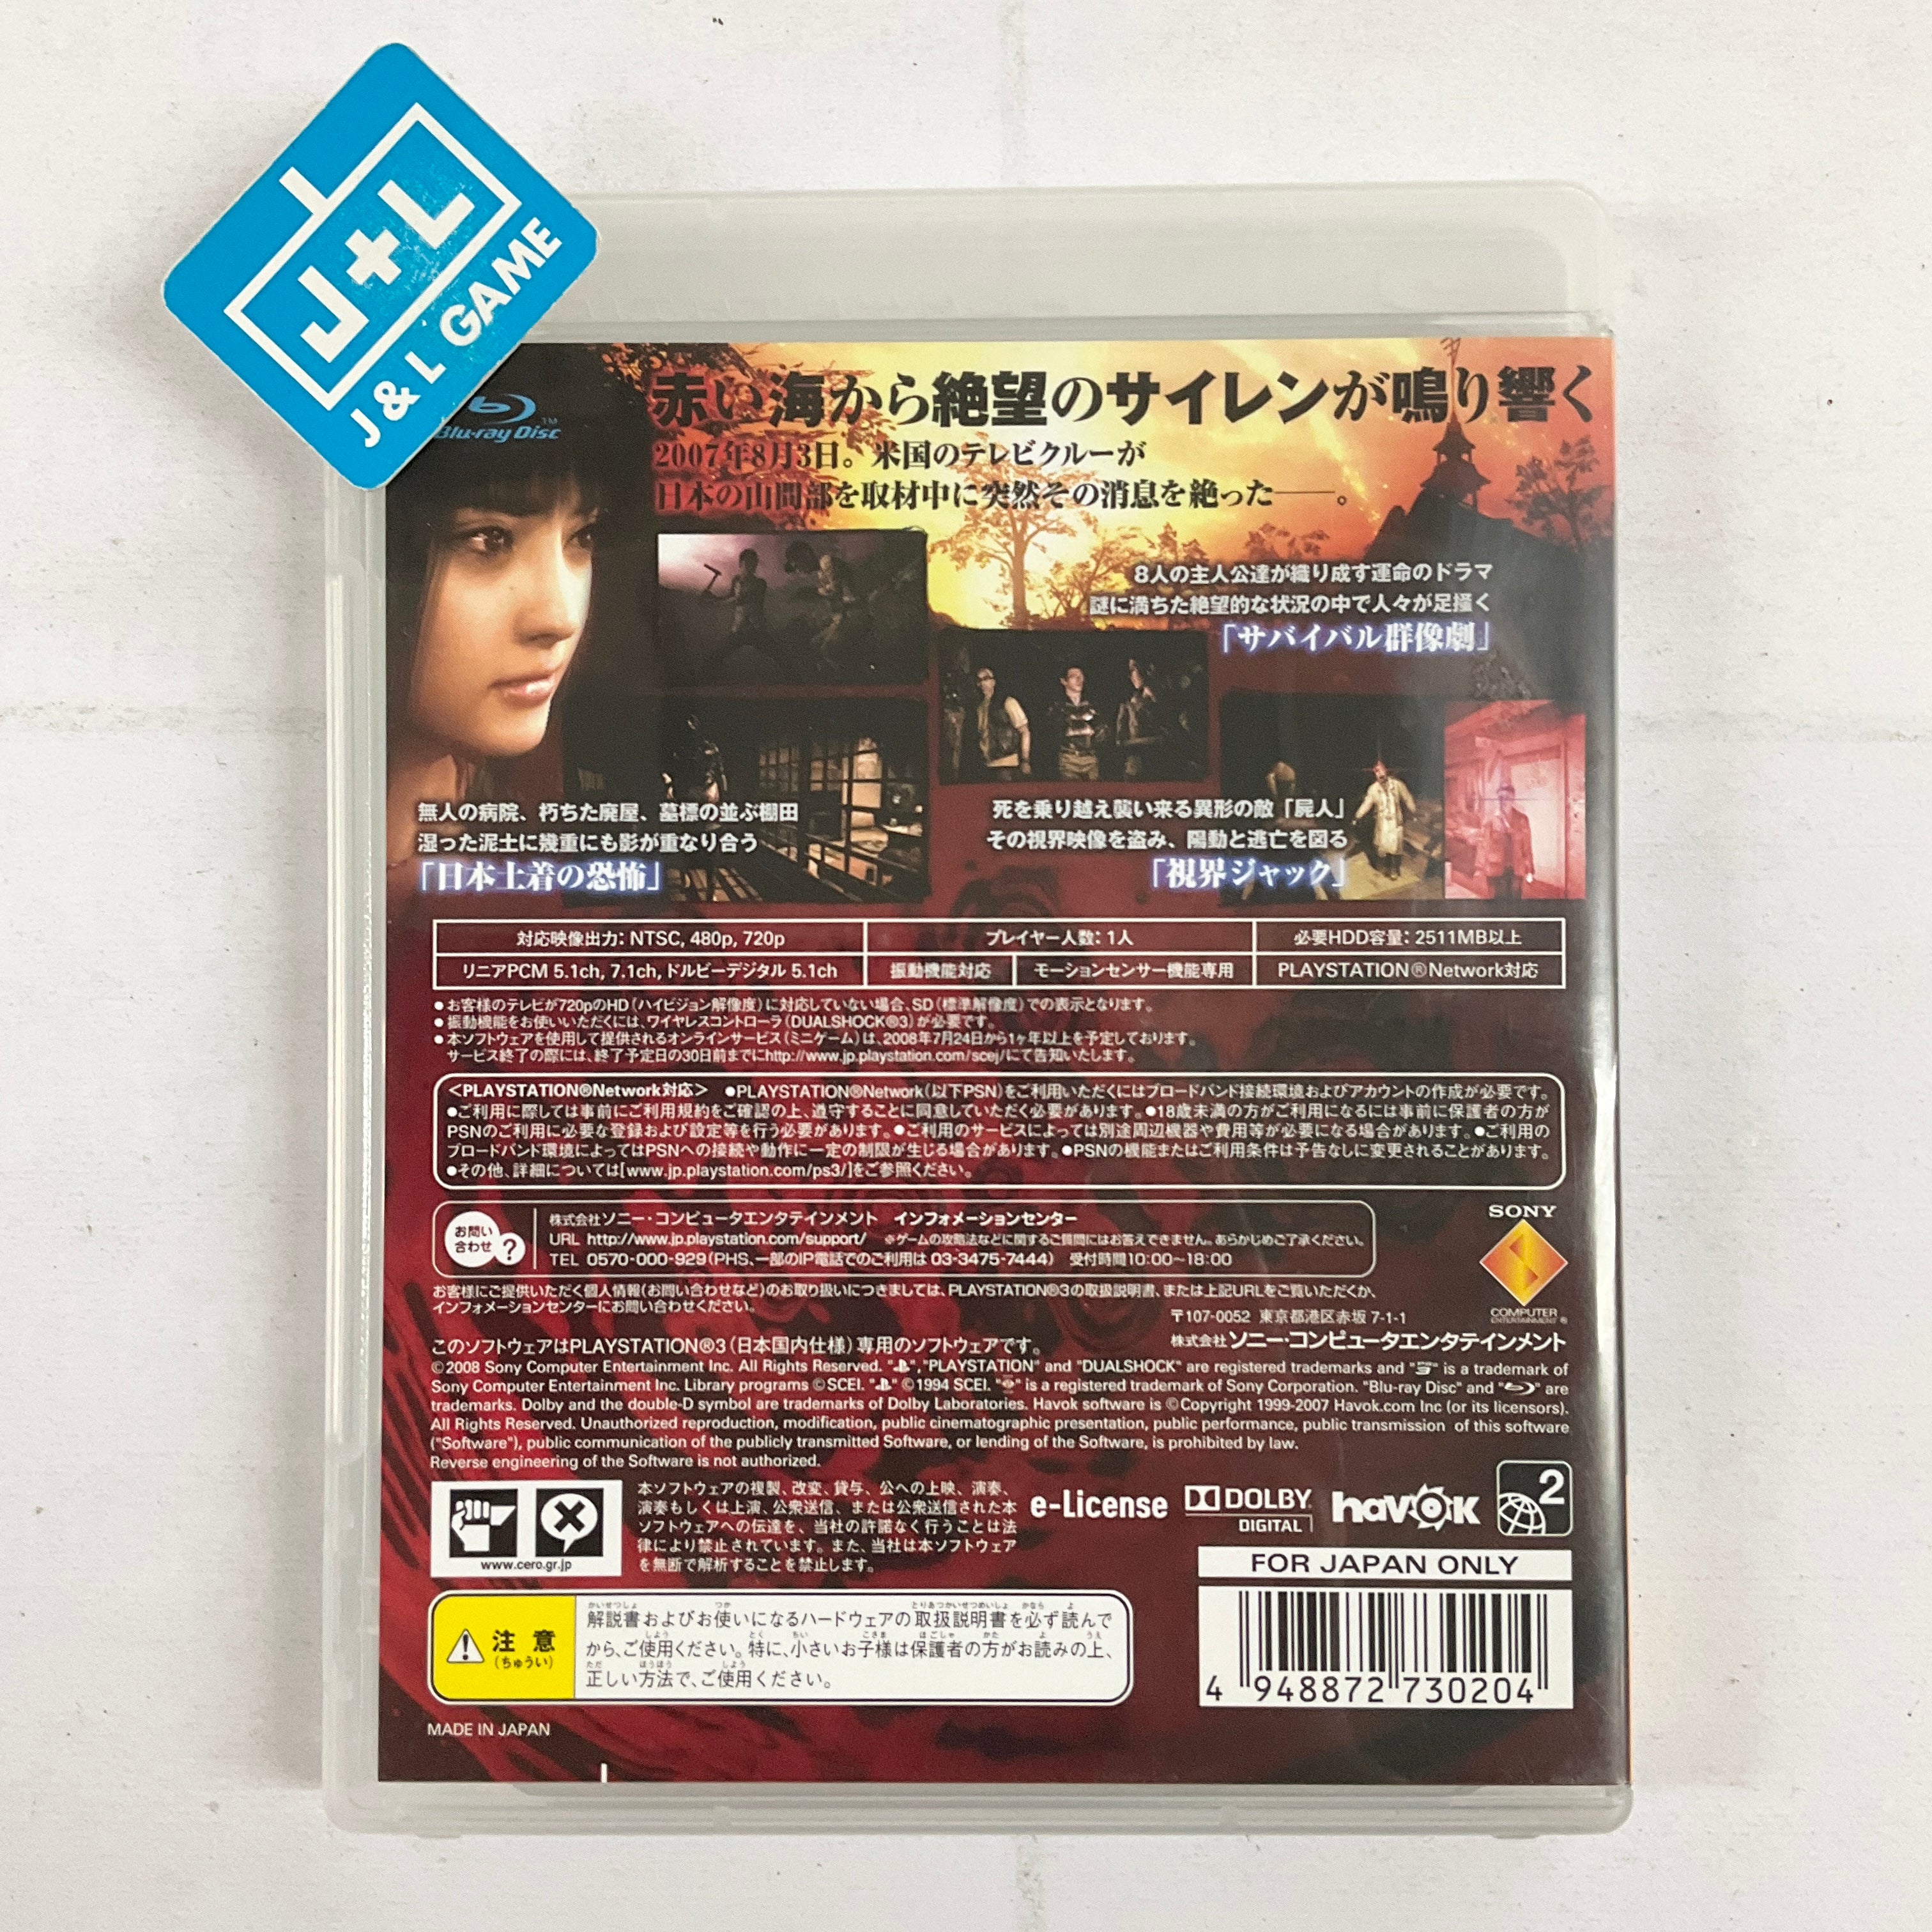 SIREN: New Translation - (PS3) PlayStation 3 [Pre-Owned] (Japanese Import) Video Games SCEI   